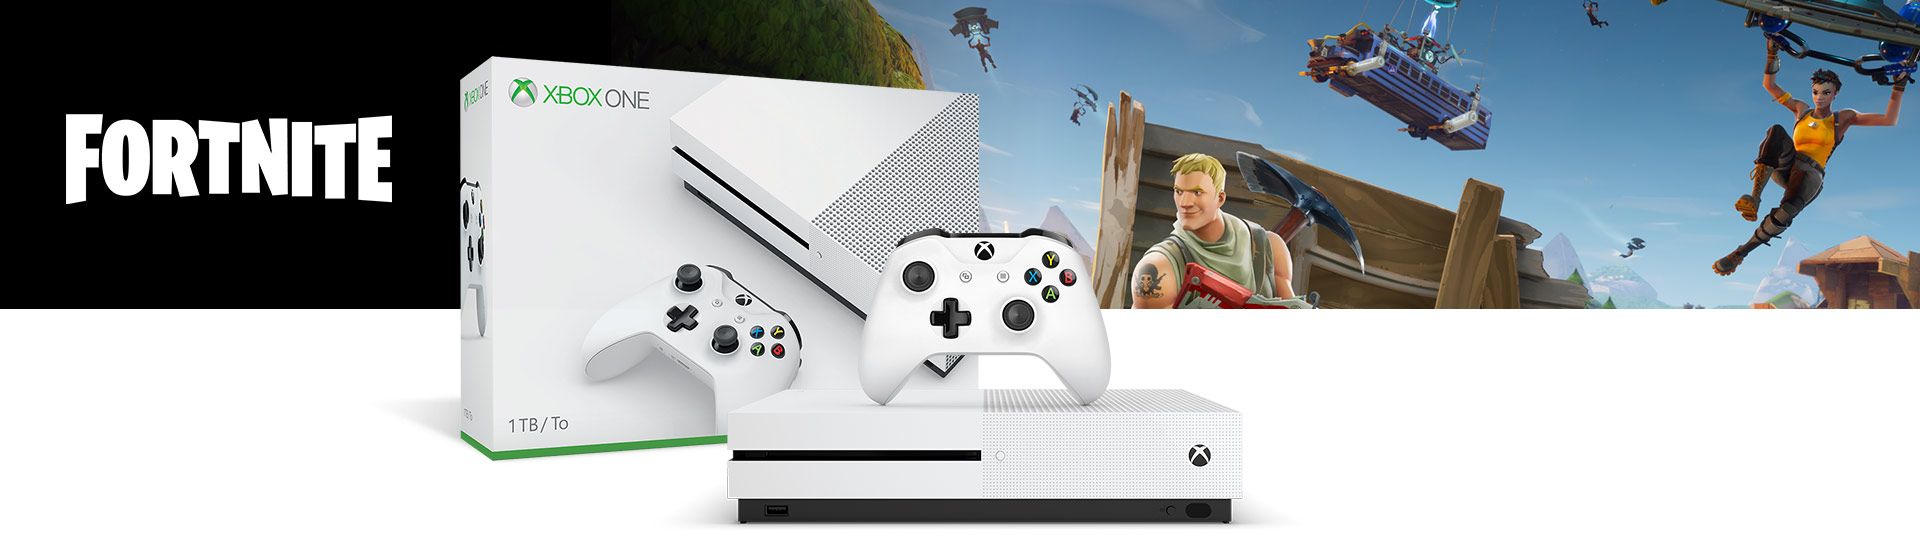 front view of xbox one s fortnite bundle with product box - is fortnite free to download on xbox one